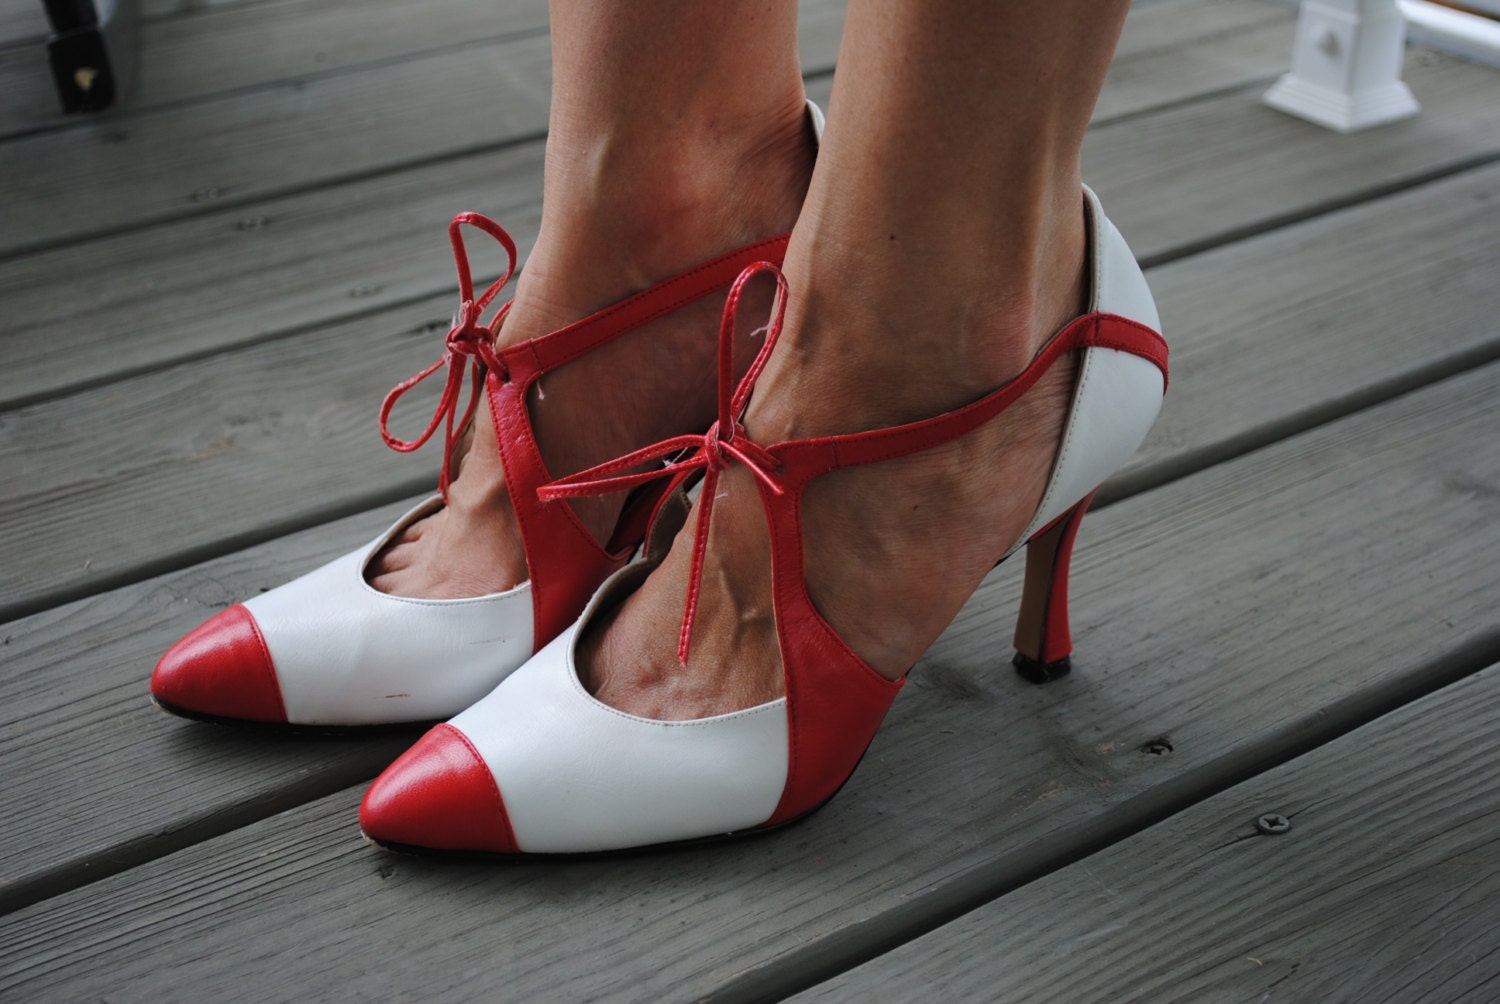 Red and White Stiletto Heel Shoes 7M by lorradams on Etsy